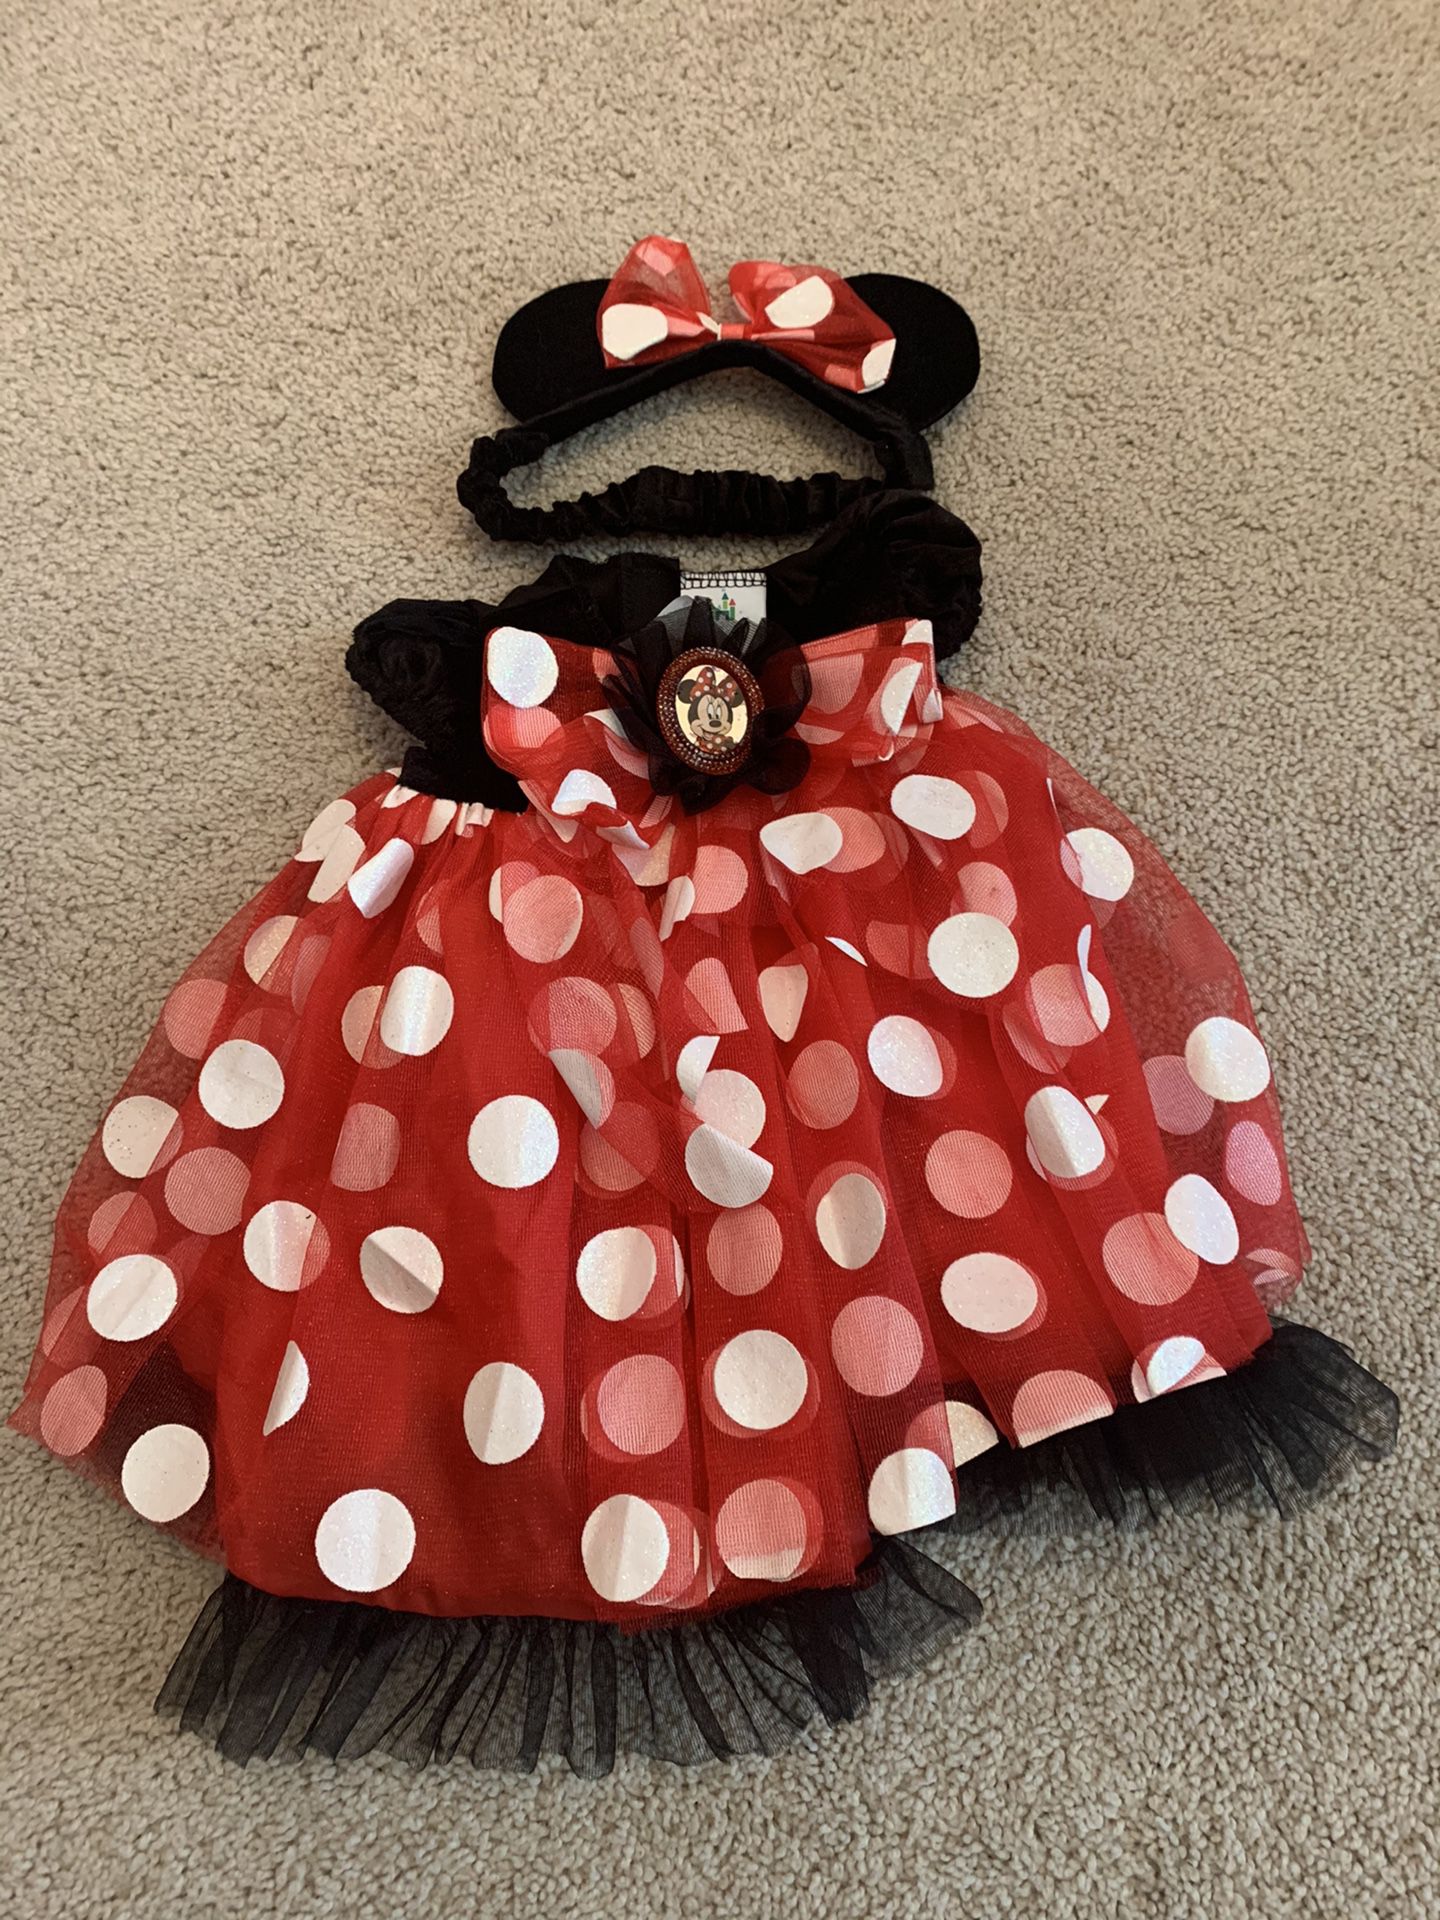 Minnie Mouse baby costume